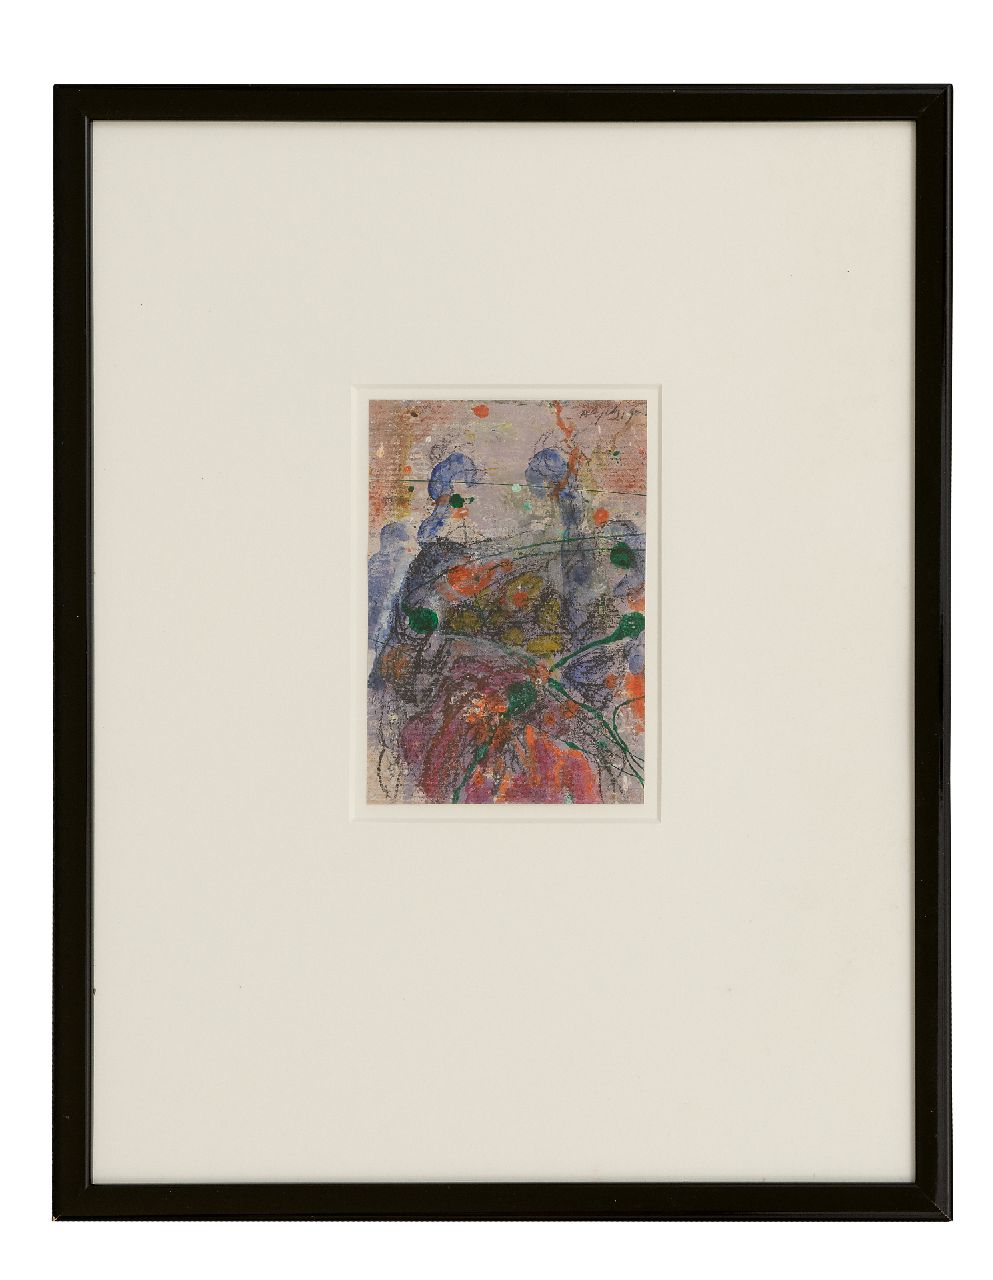 Snijders A.C.  | Adrianus Cornelis 'Ad' Snijders, Untitled, mixed media on paper 10.4 x 14.8 cm, signed u.r. and dated '90